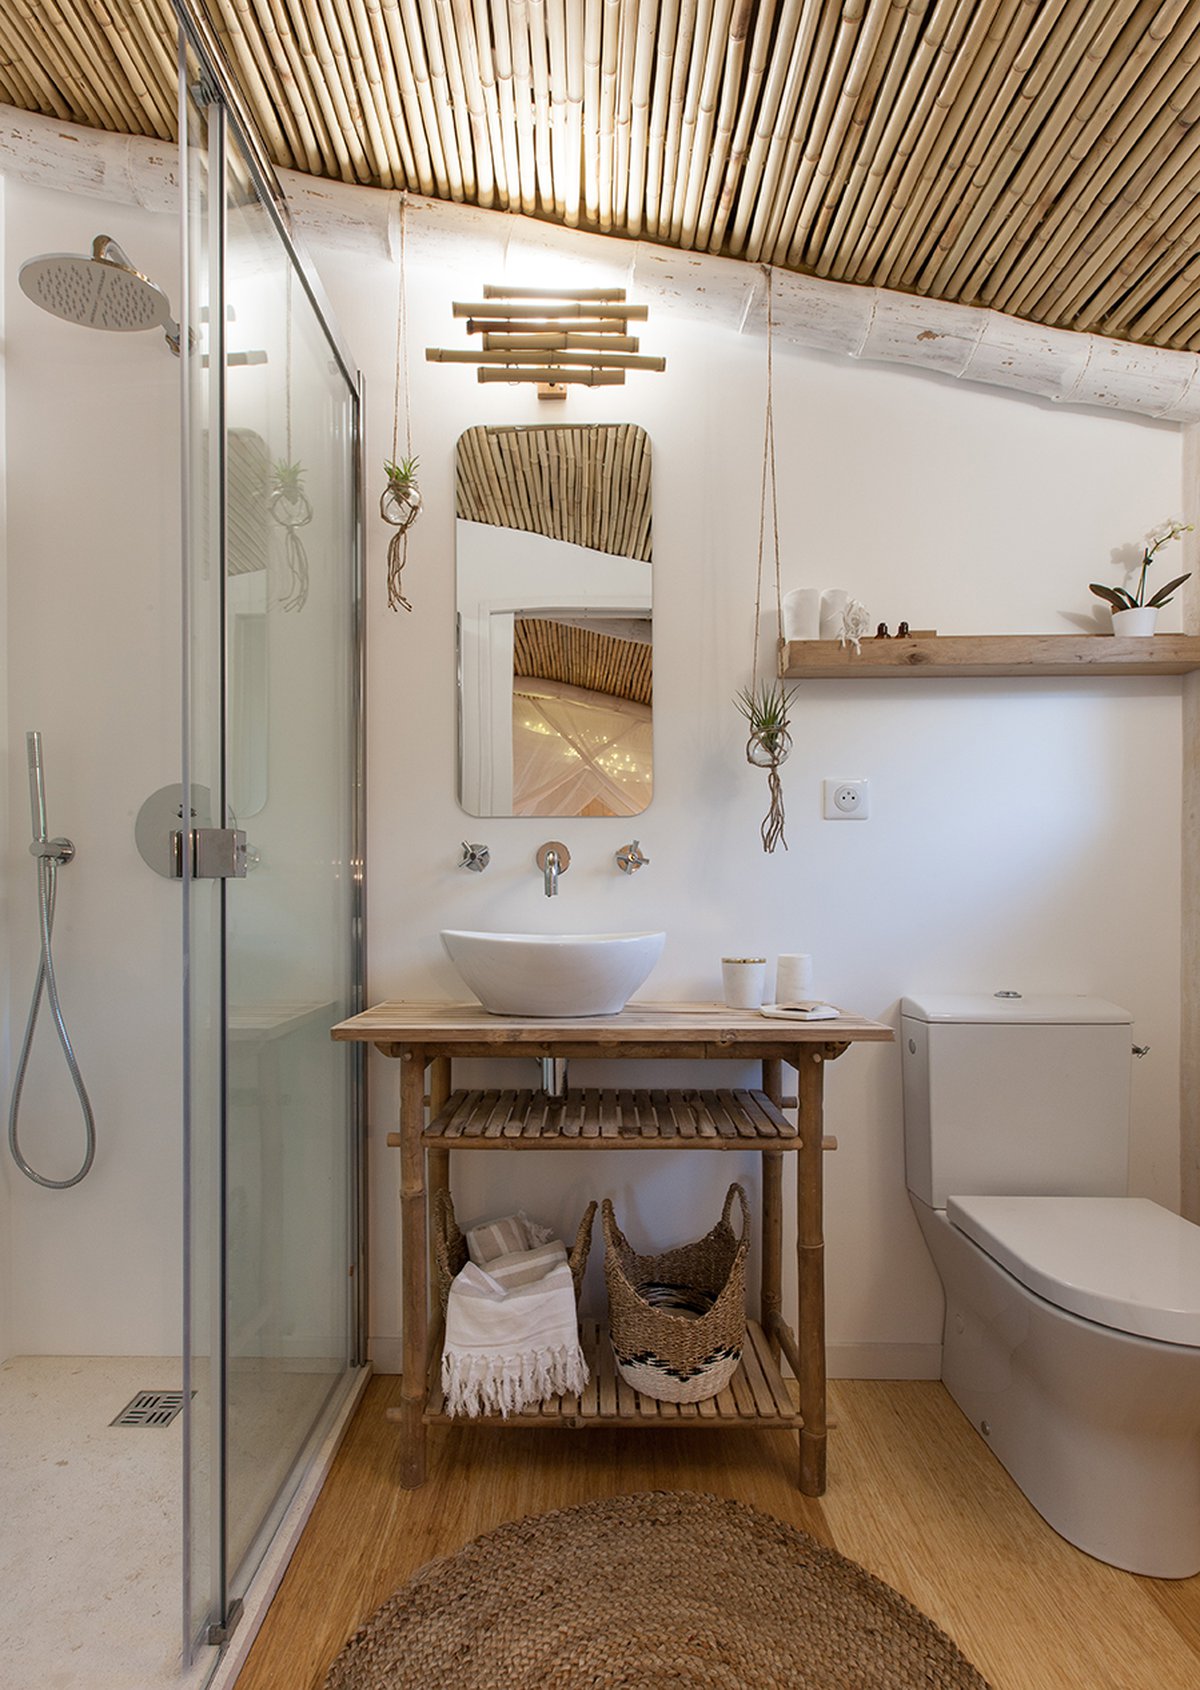 CABANE & SPA PELLA ROCA a small and cozy hotel in France. Bathroom decorated with Bamboo furniture